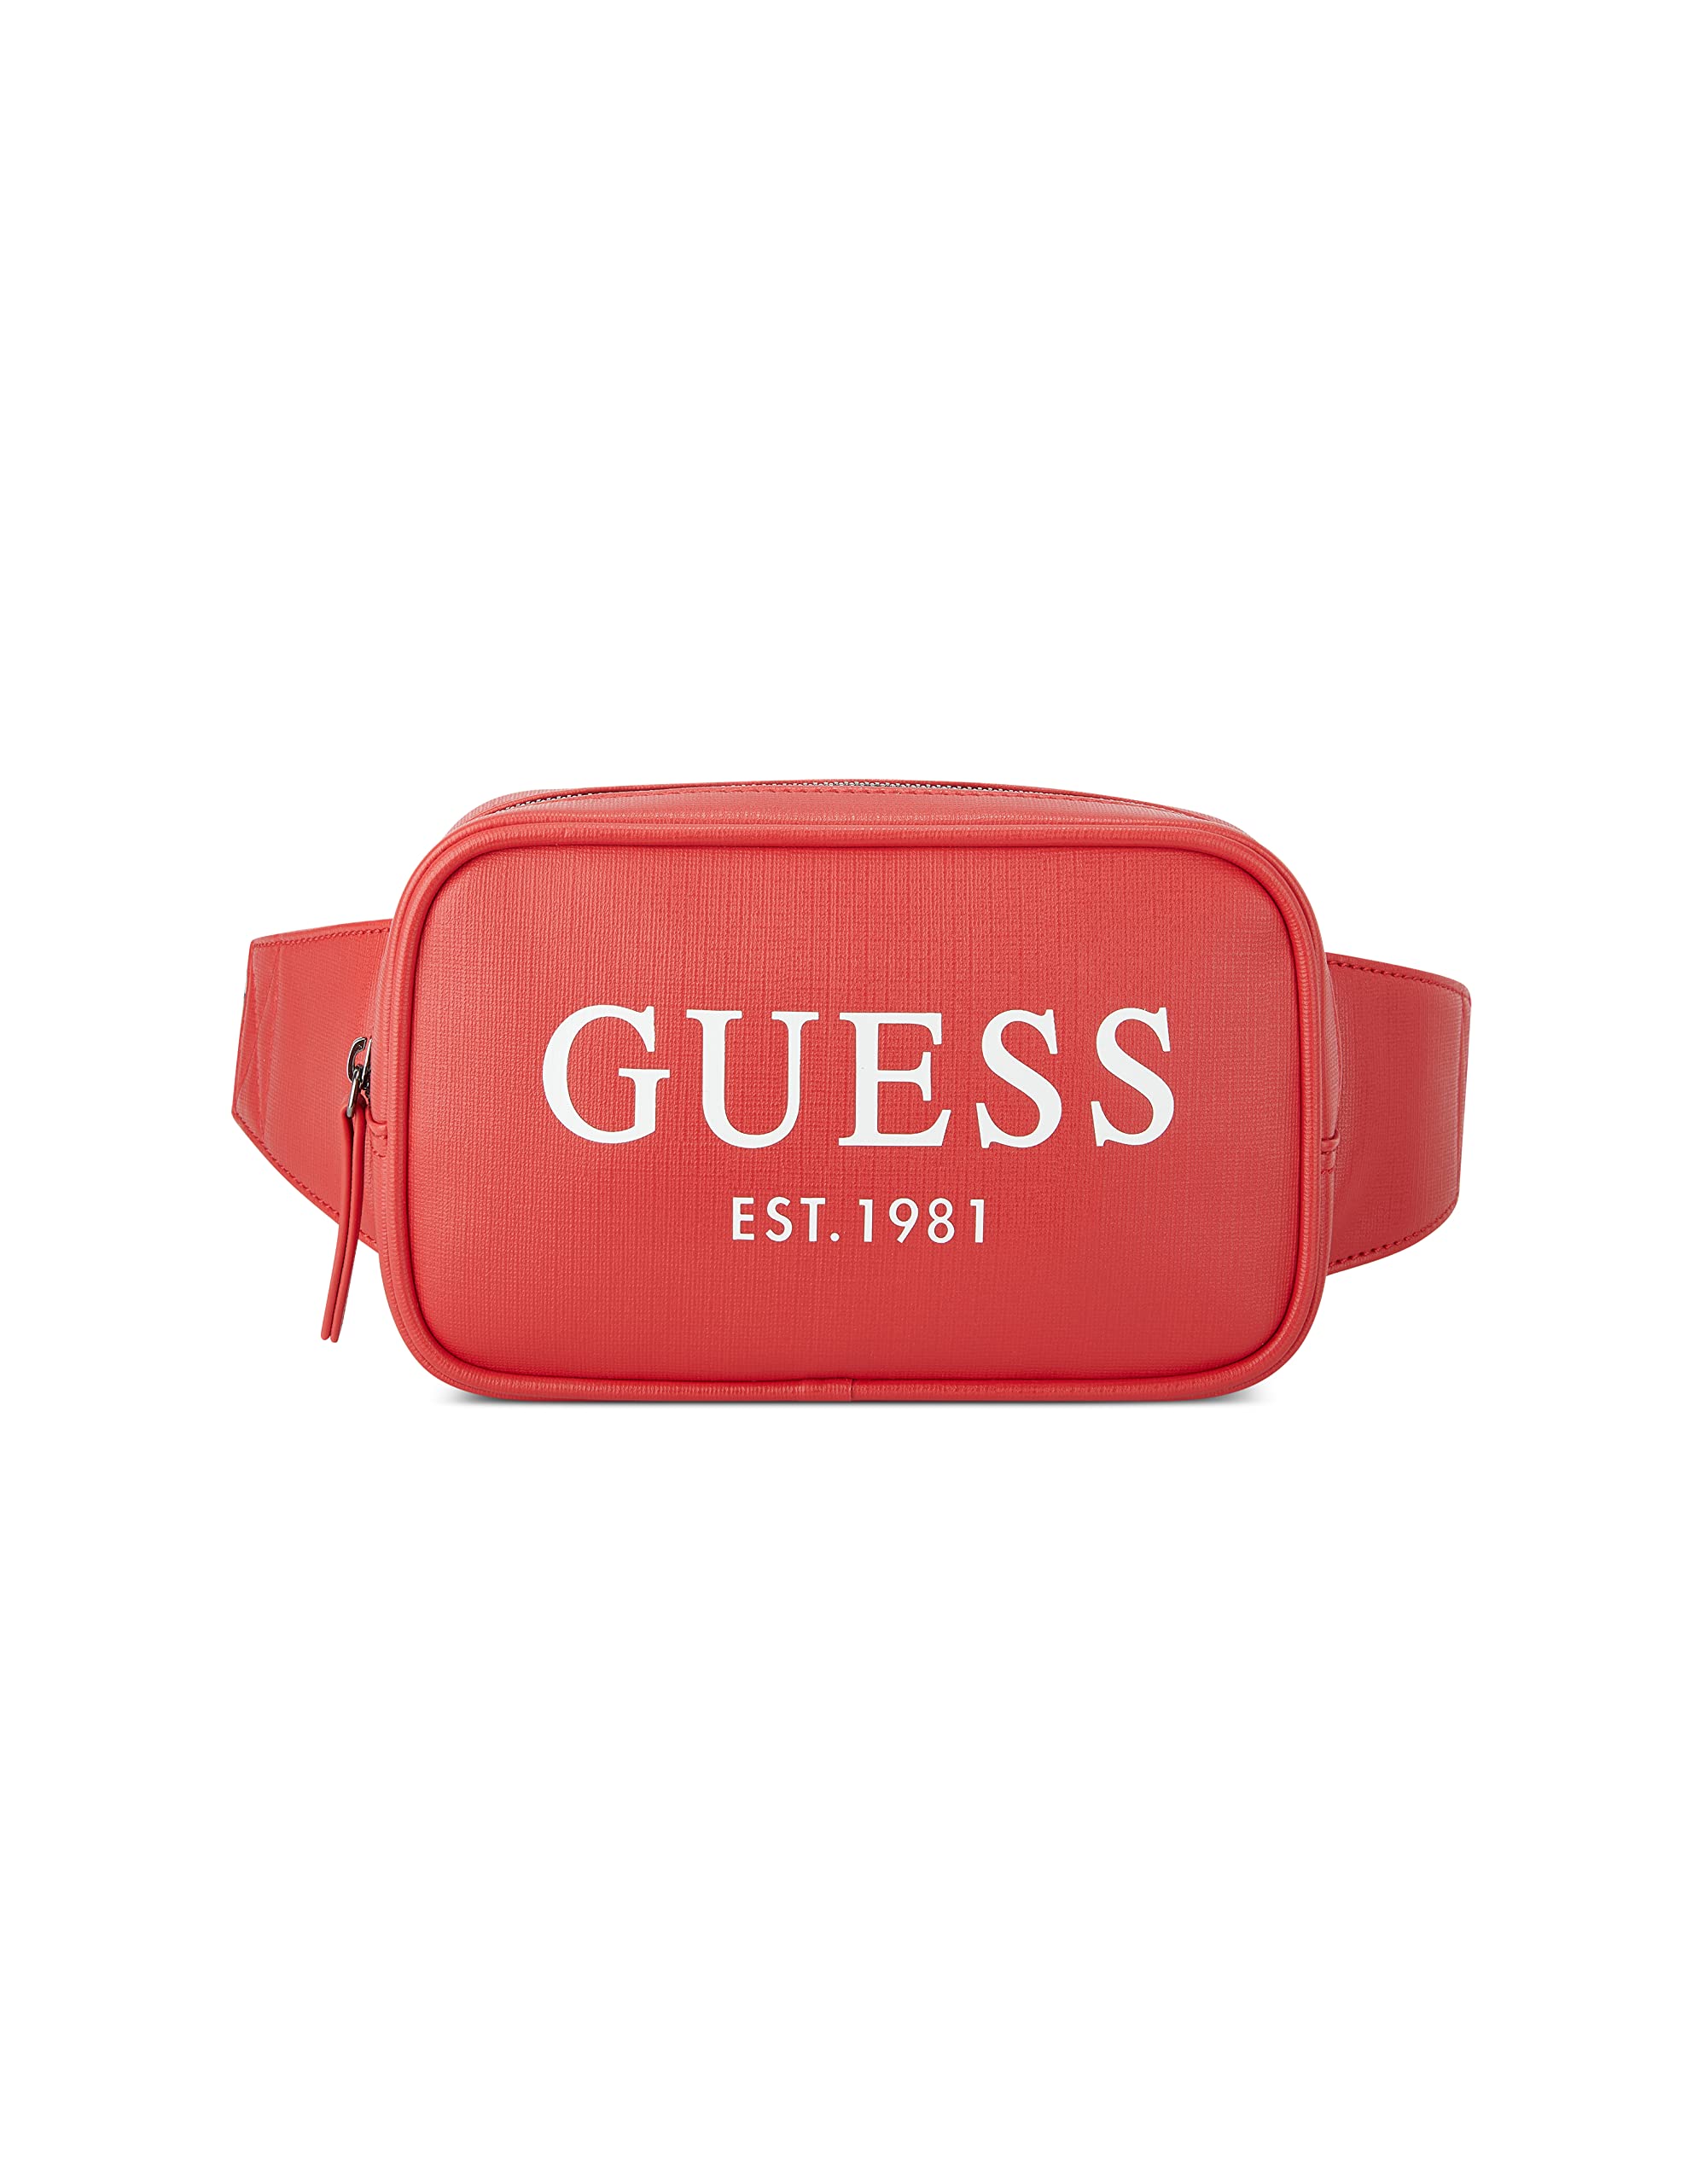 GUESS Outfitters Bum Bag